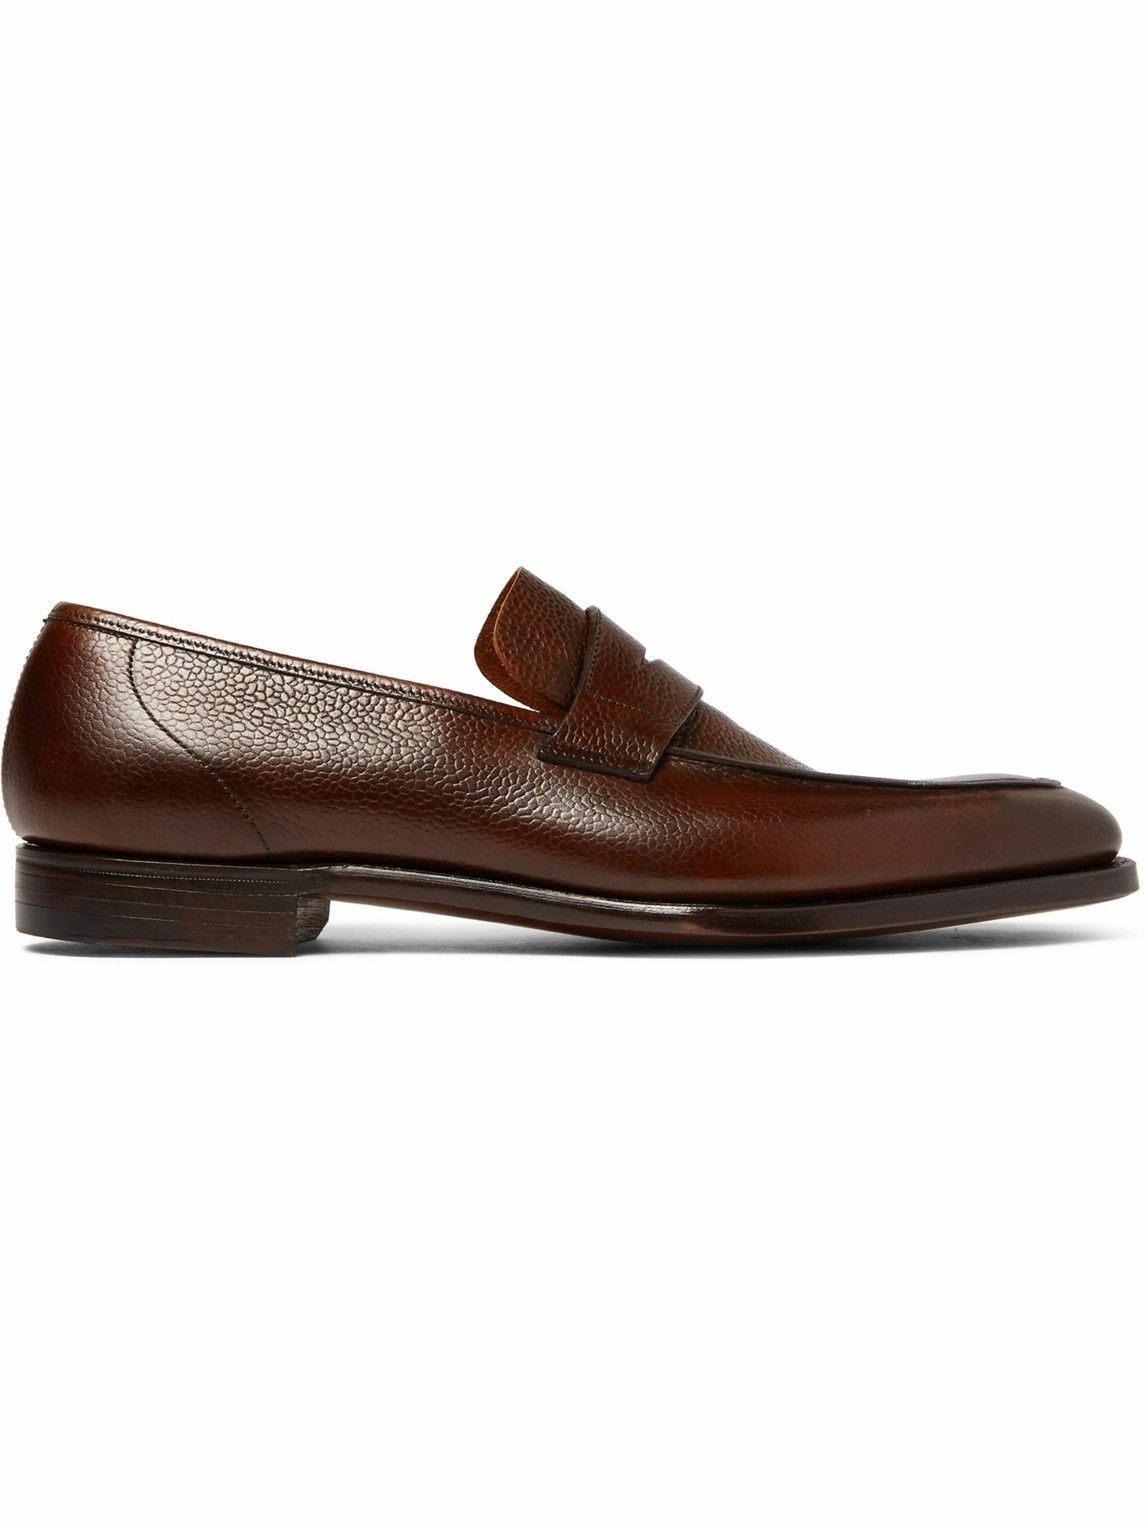 George Cleverley - George Full-Grain Leather Penny Loafers - Brown ...